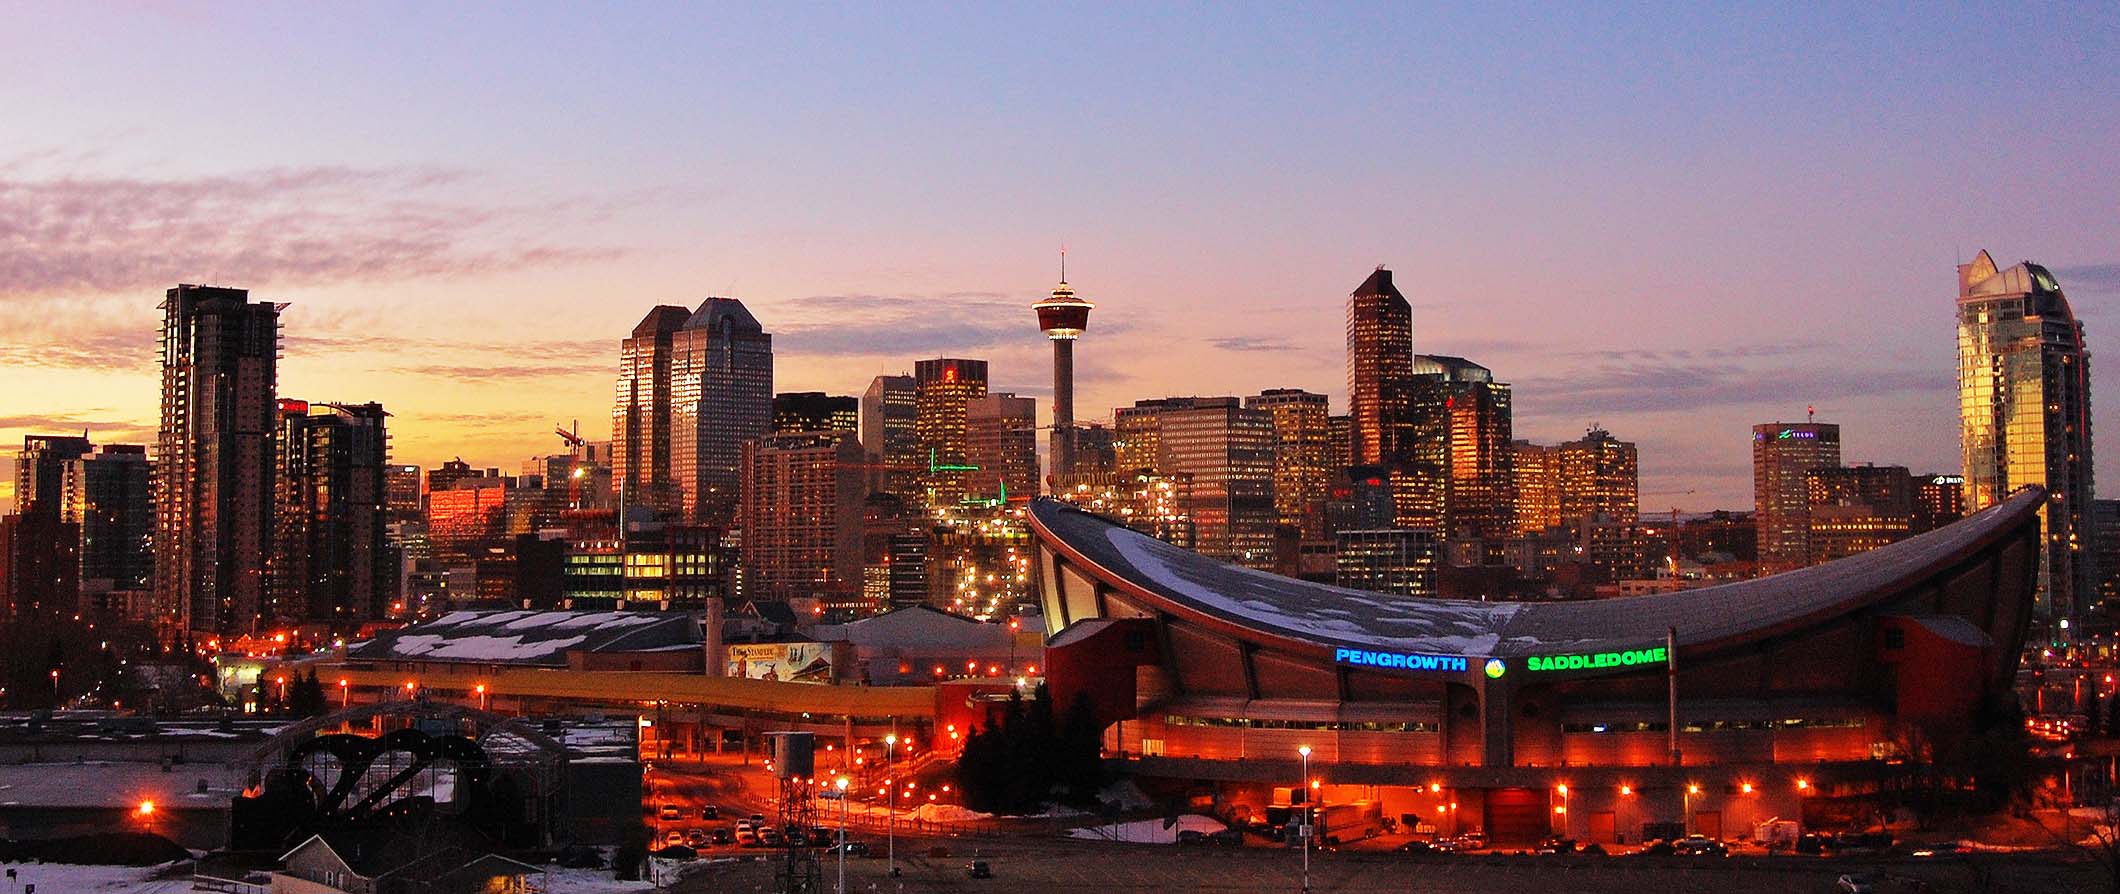 The skyline of Calgary, Canada during sunset